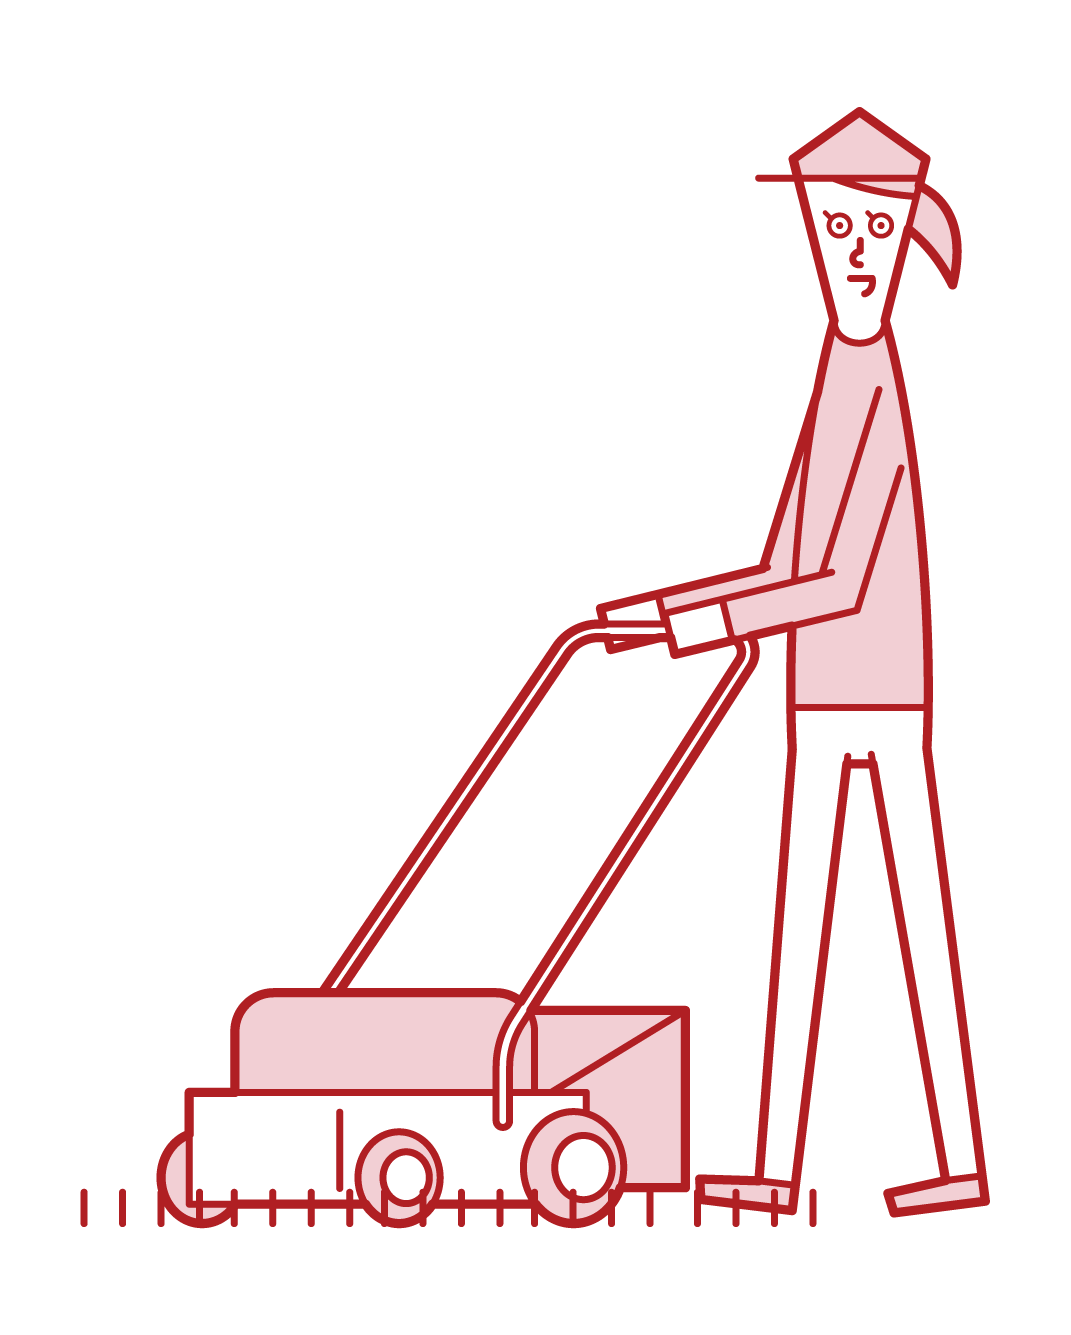 Illustration of a woman using a lawnmower